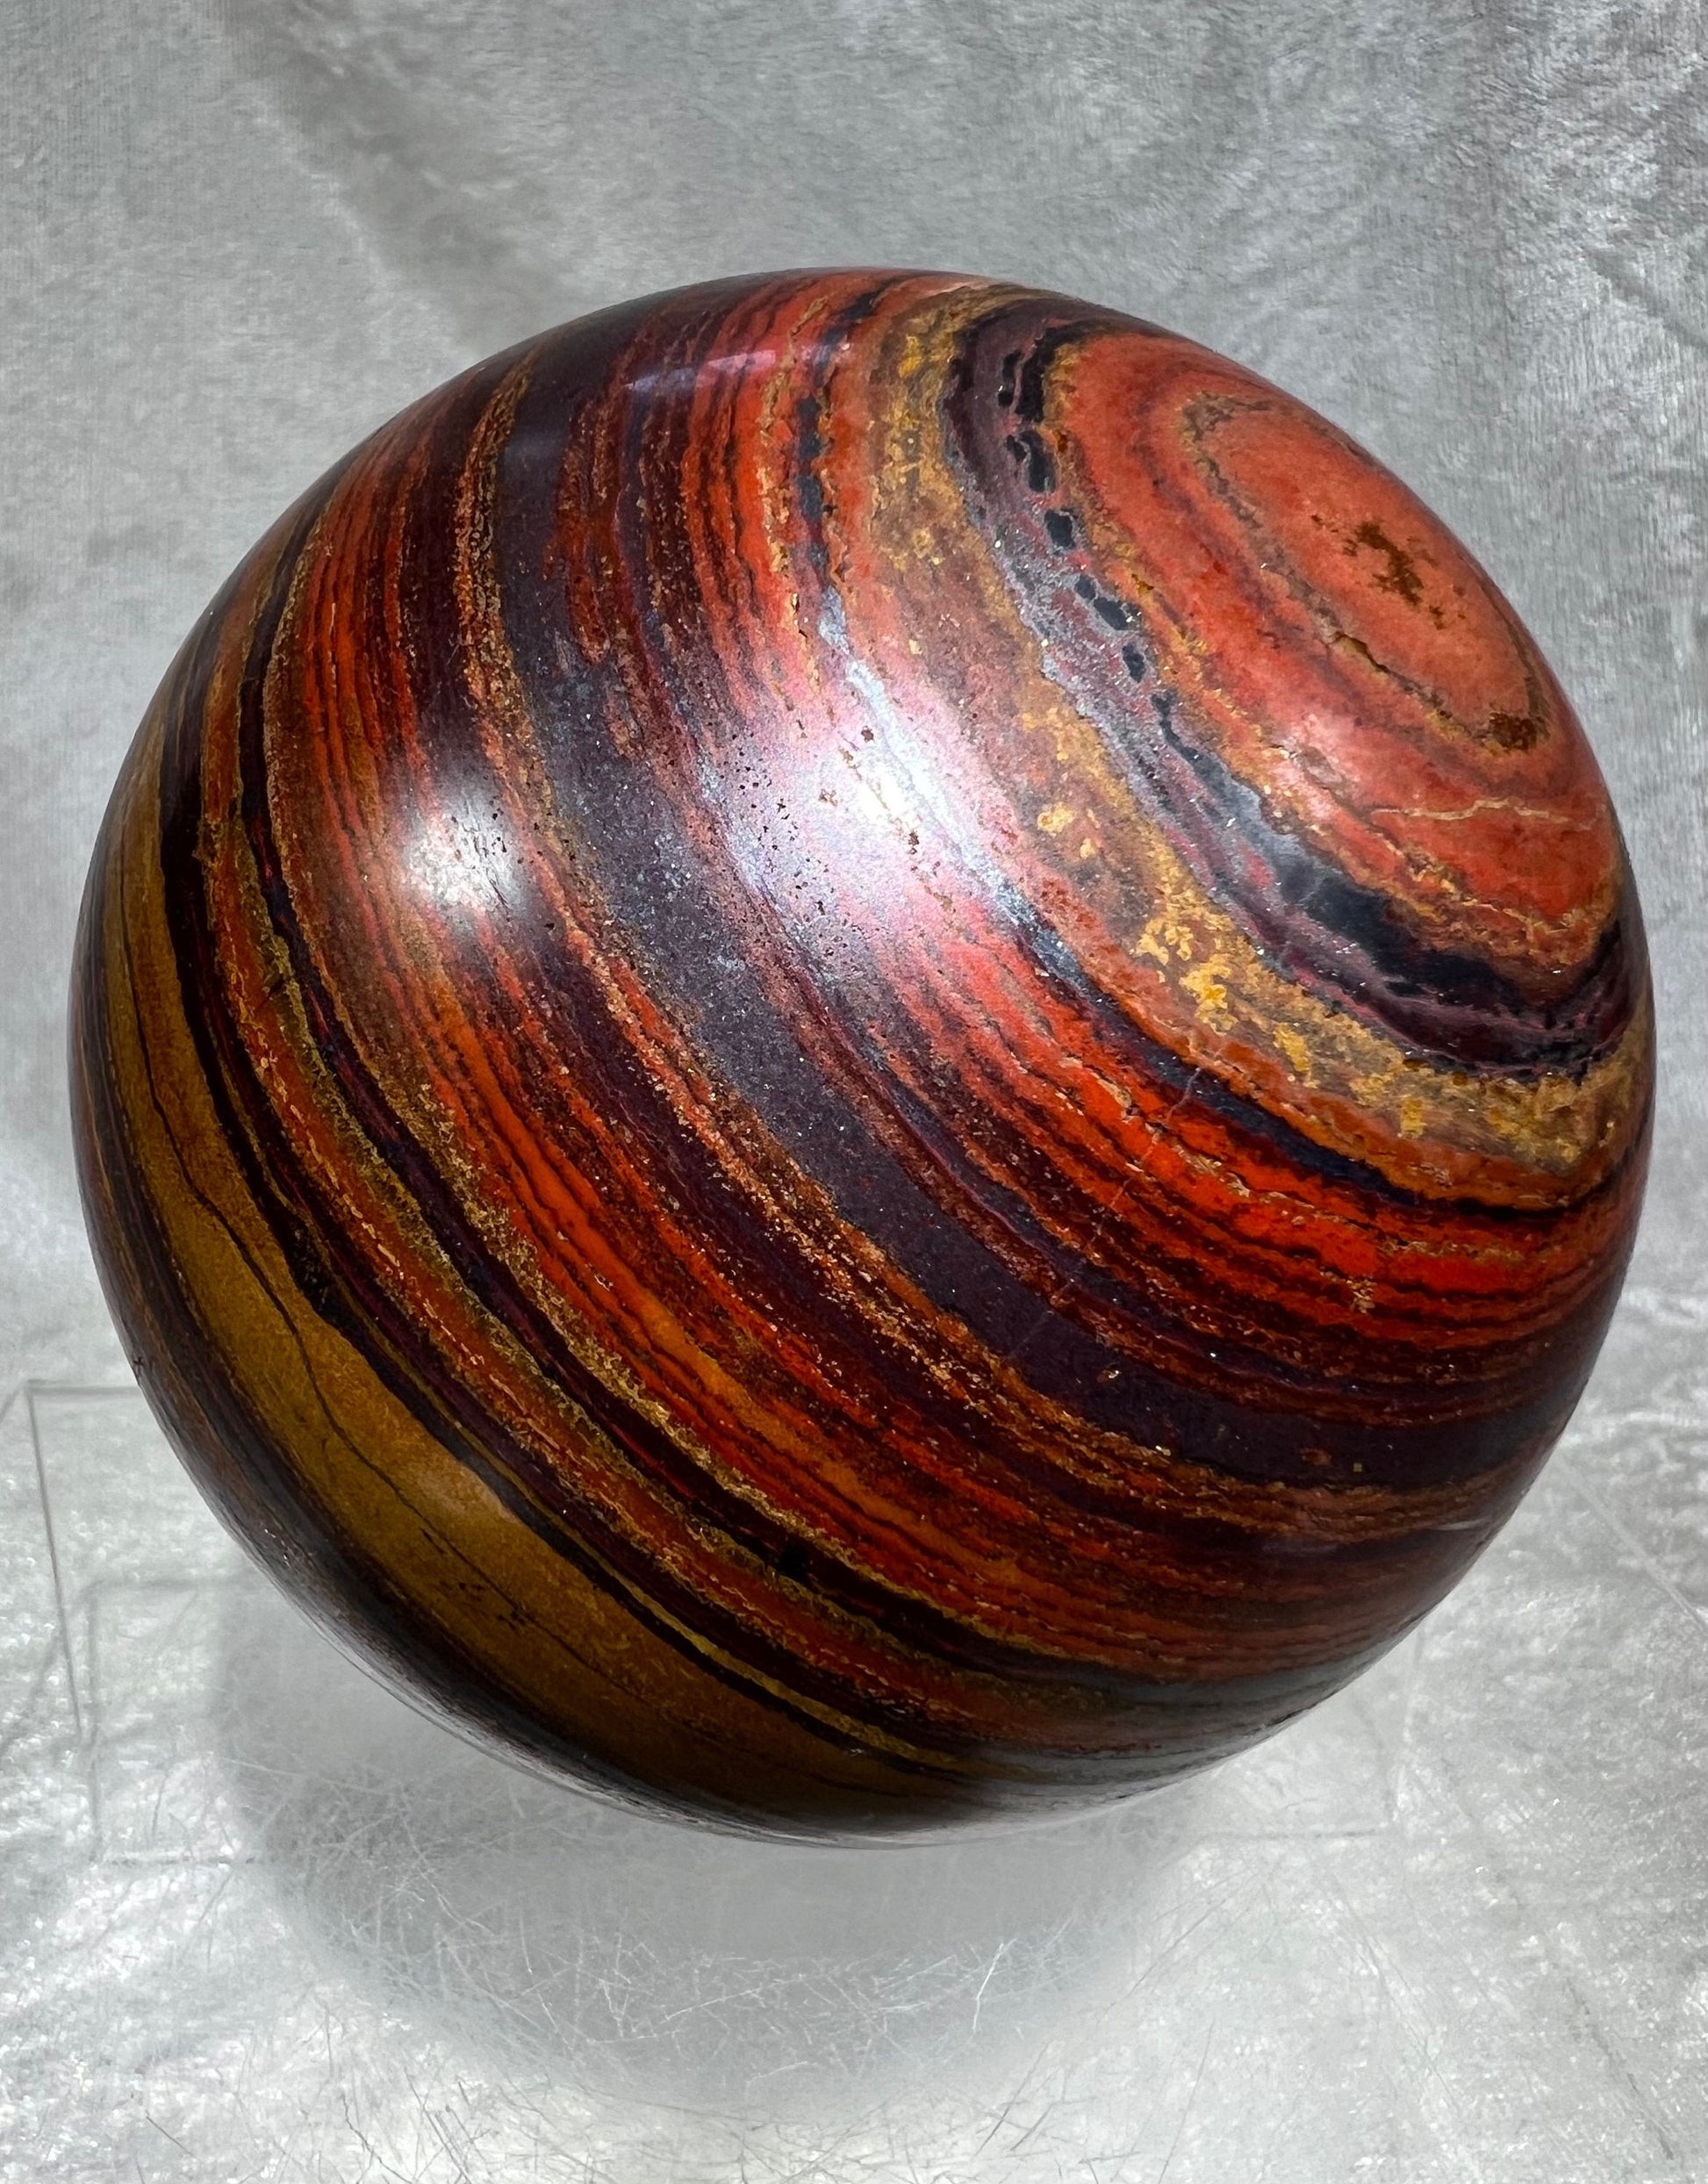 Rare XL Tiger Iron Crystal Sphere. 92mm, 2.9 lbs. Hand Selected High Quality. Amazing Hematite Flash!